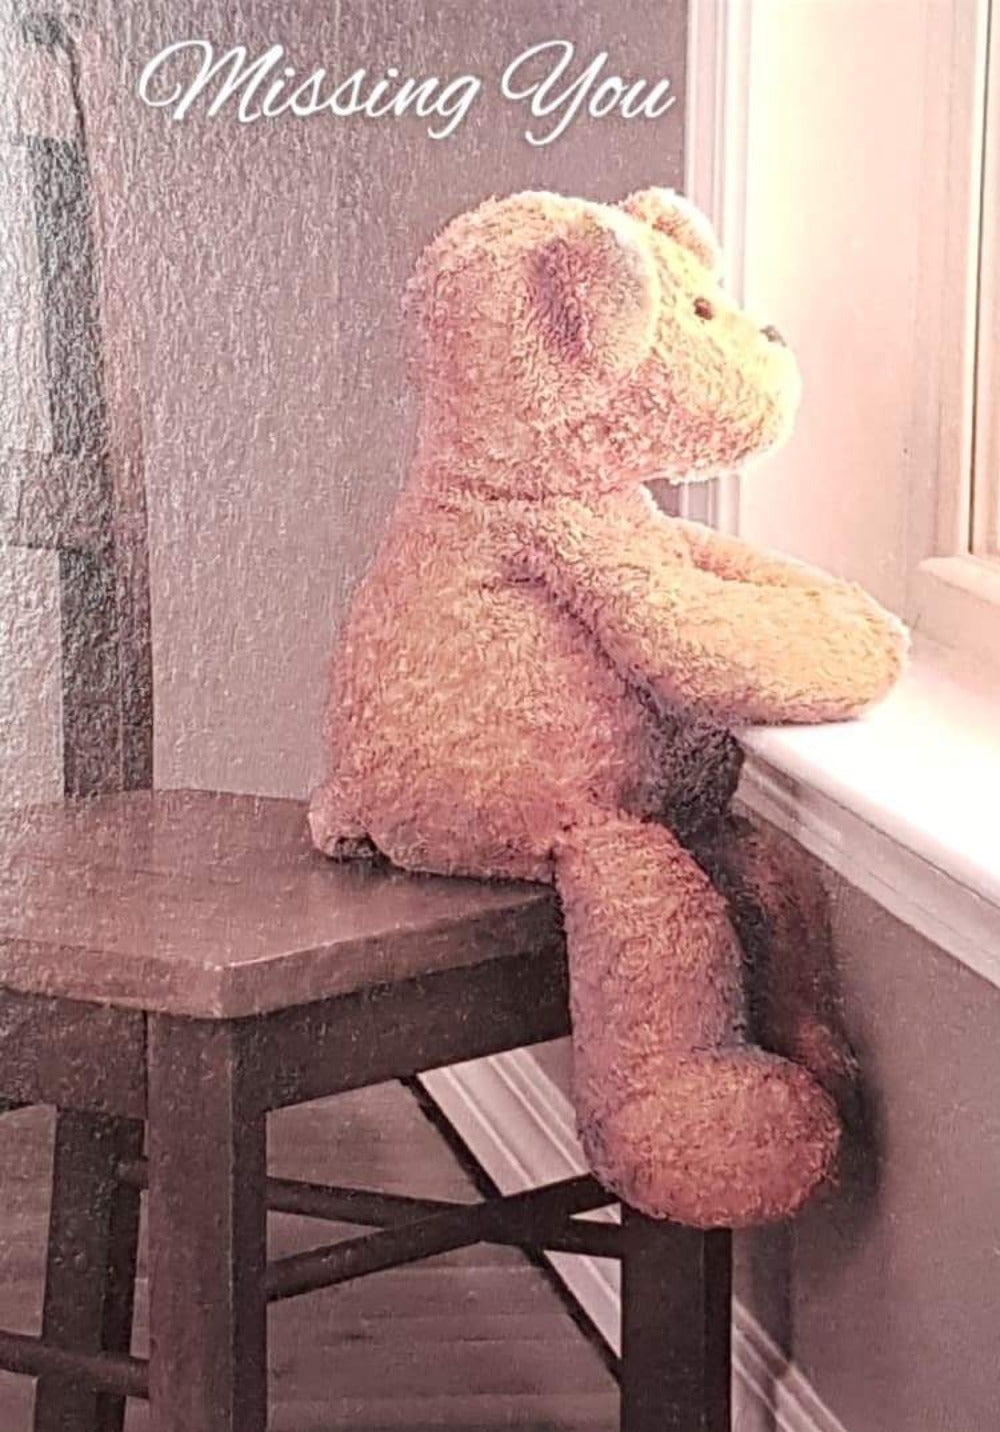 Leaving Card - Missing You / Soft Teddy Sitting On The Chair Looking Up The Window